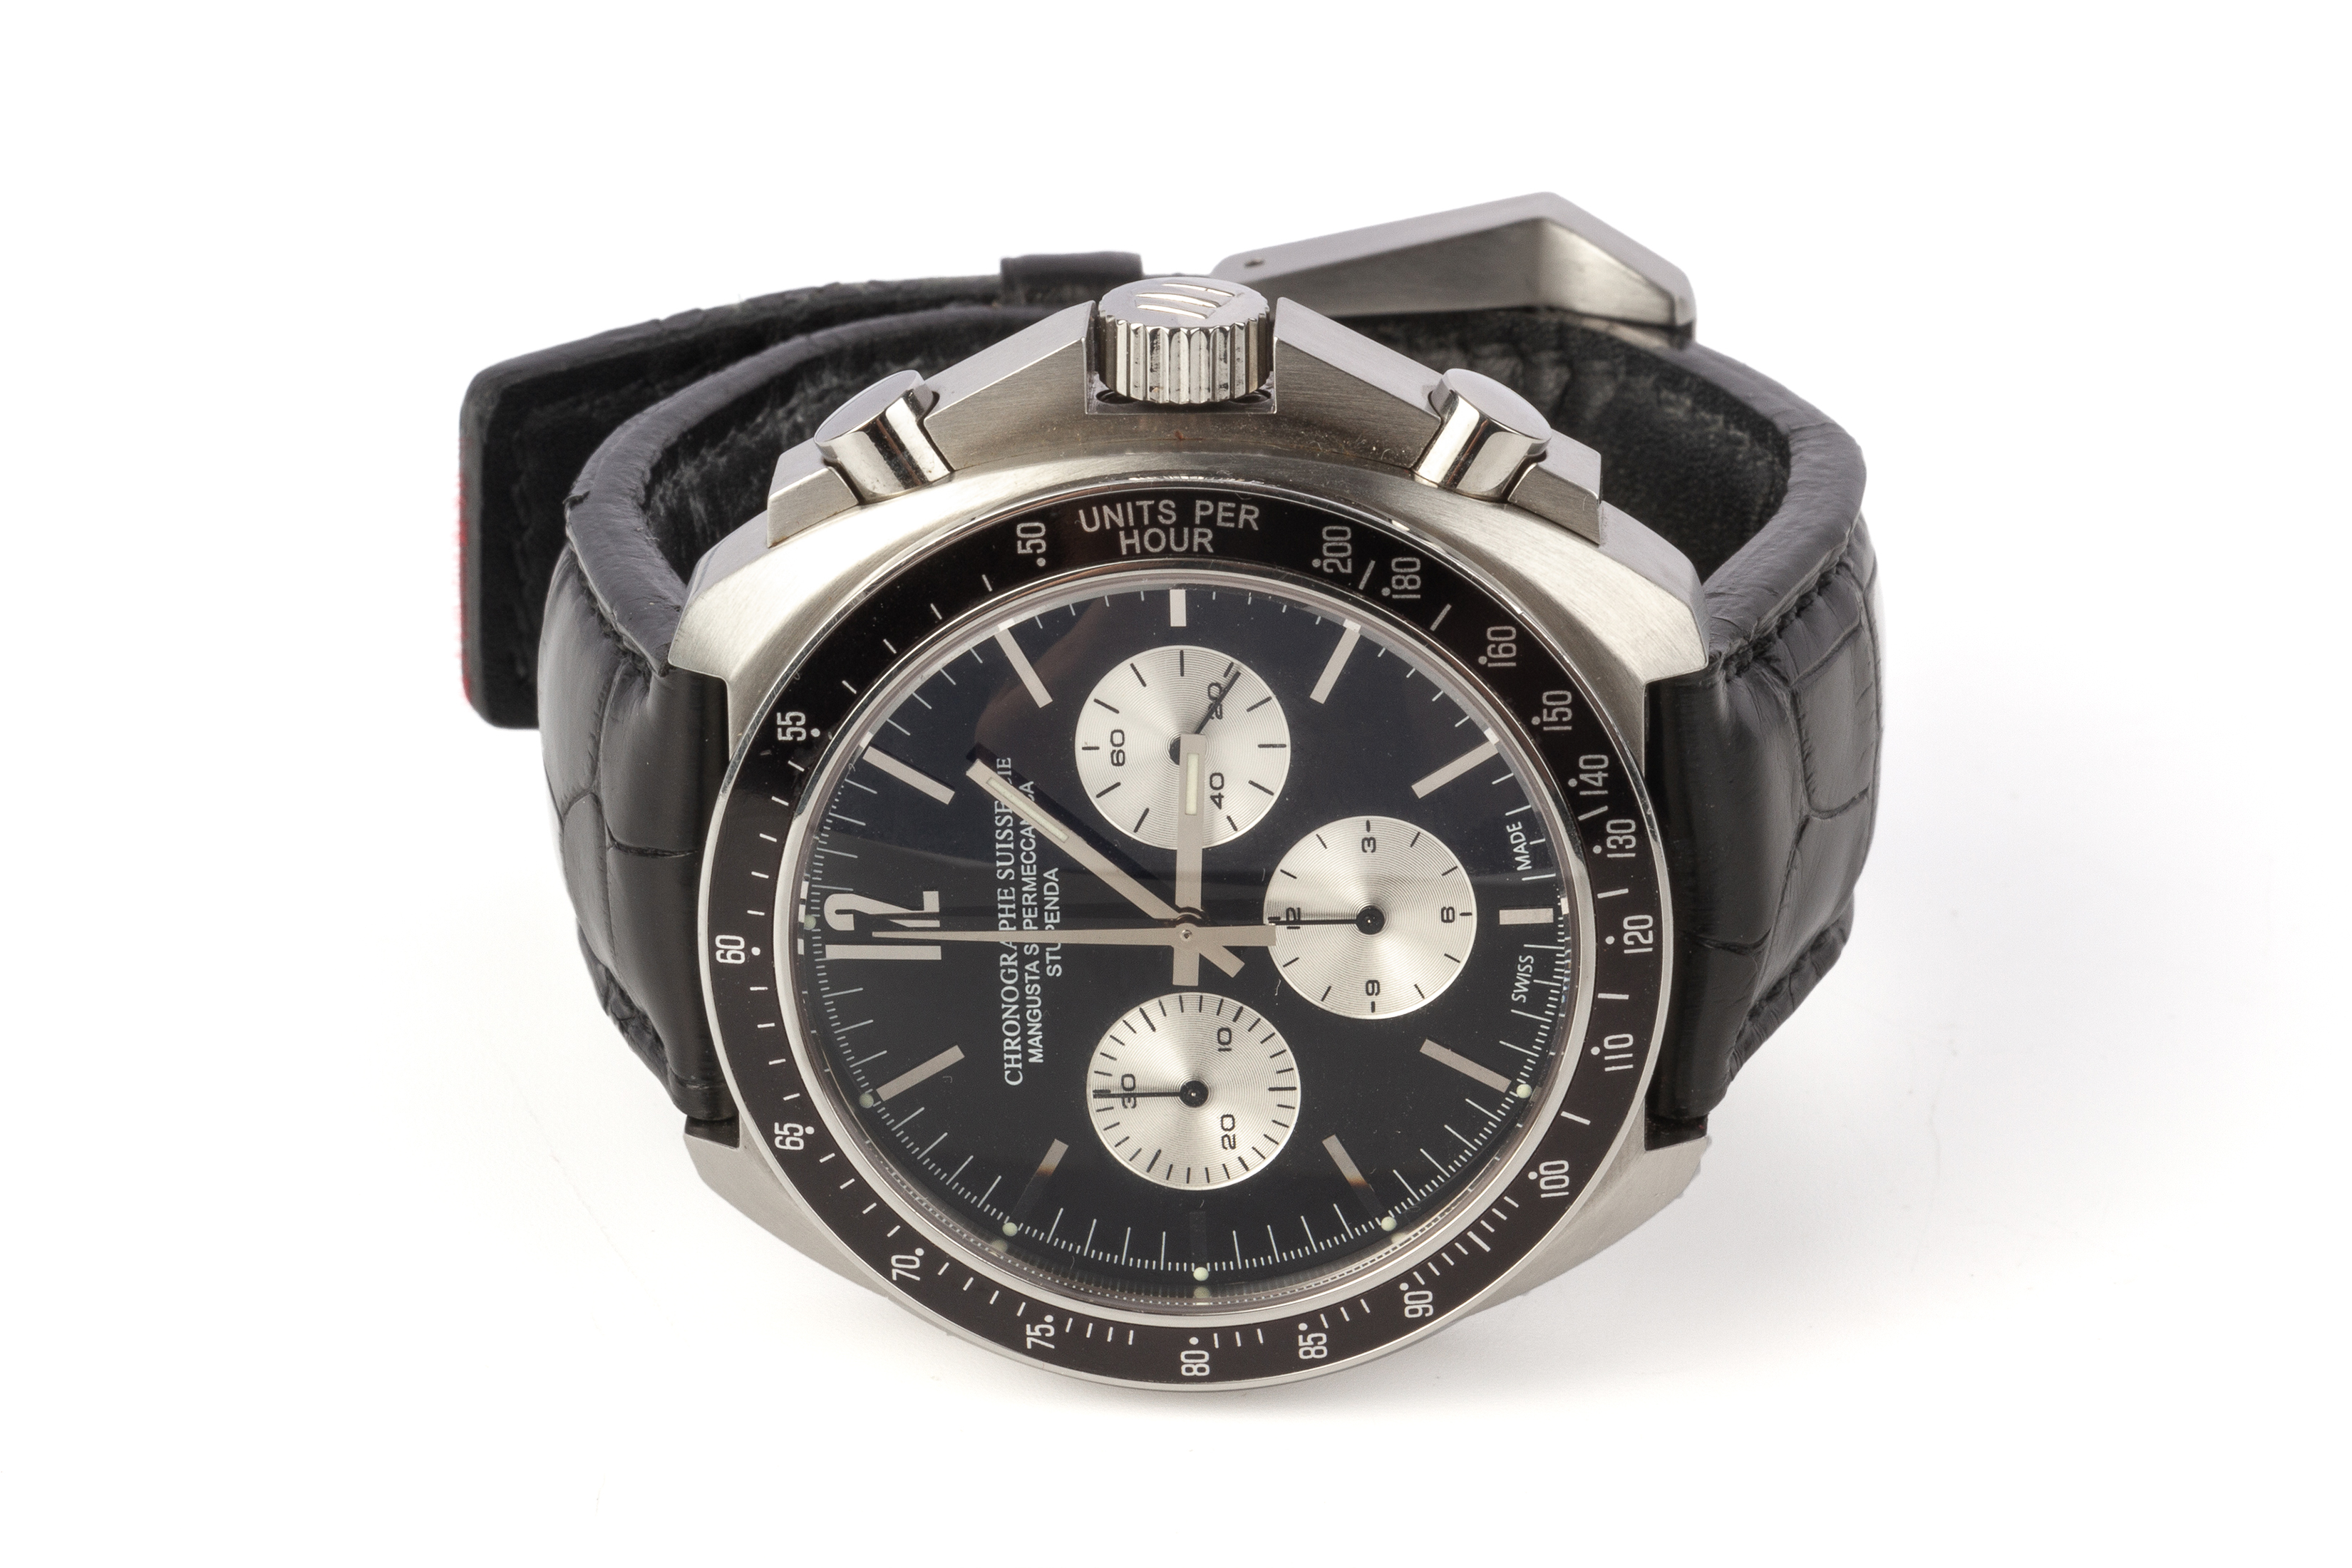 A CHRONOGRAPHE SUISSE STAINLESS STEEL AUTOMATIC WRISTWATCH - Image 2 of 3